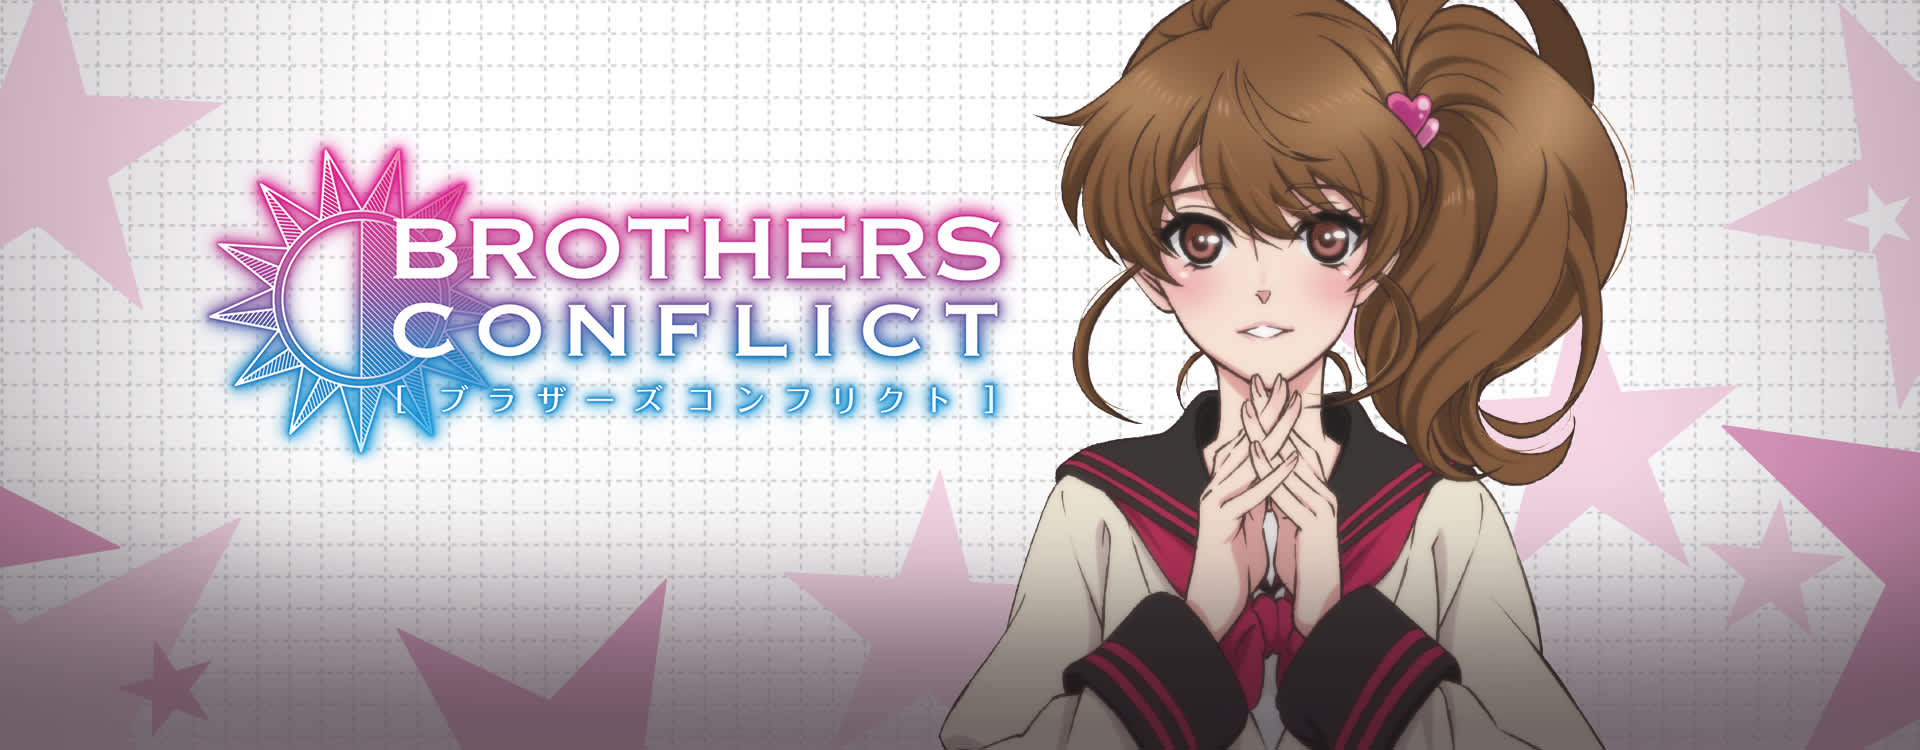 Download Anime Brother Conflict Episode 10 Sub Indo